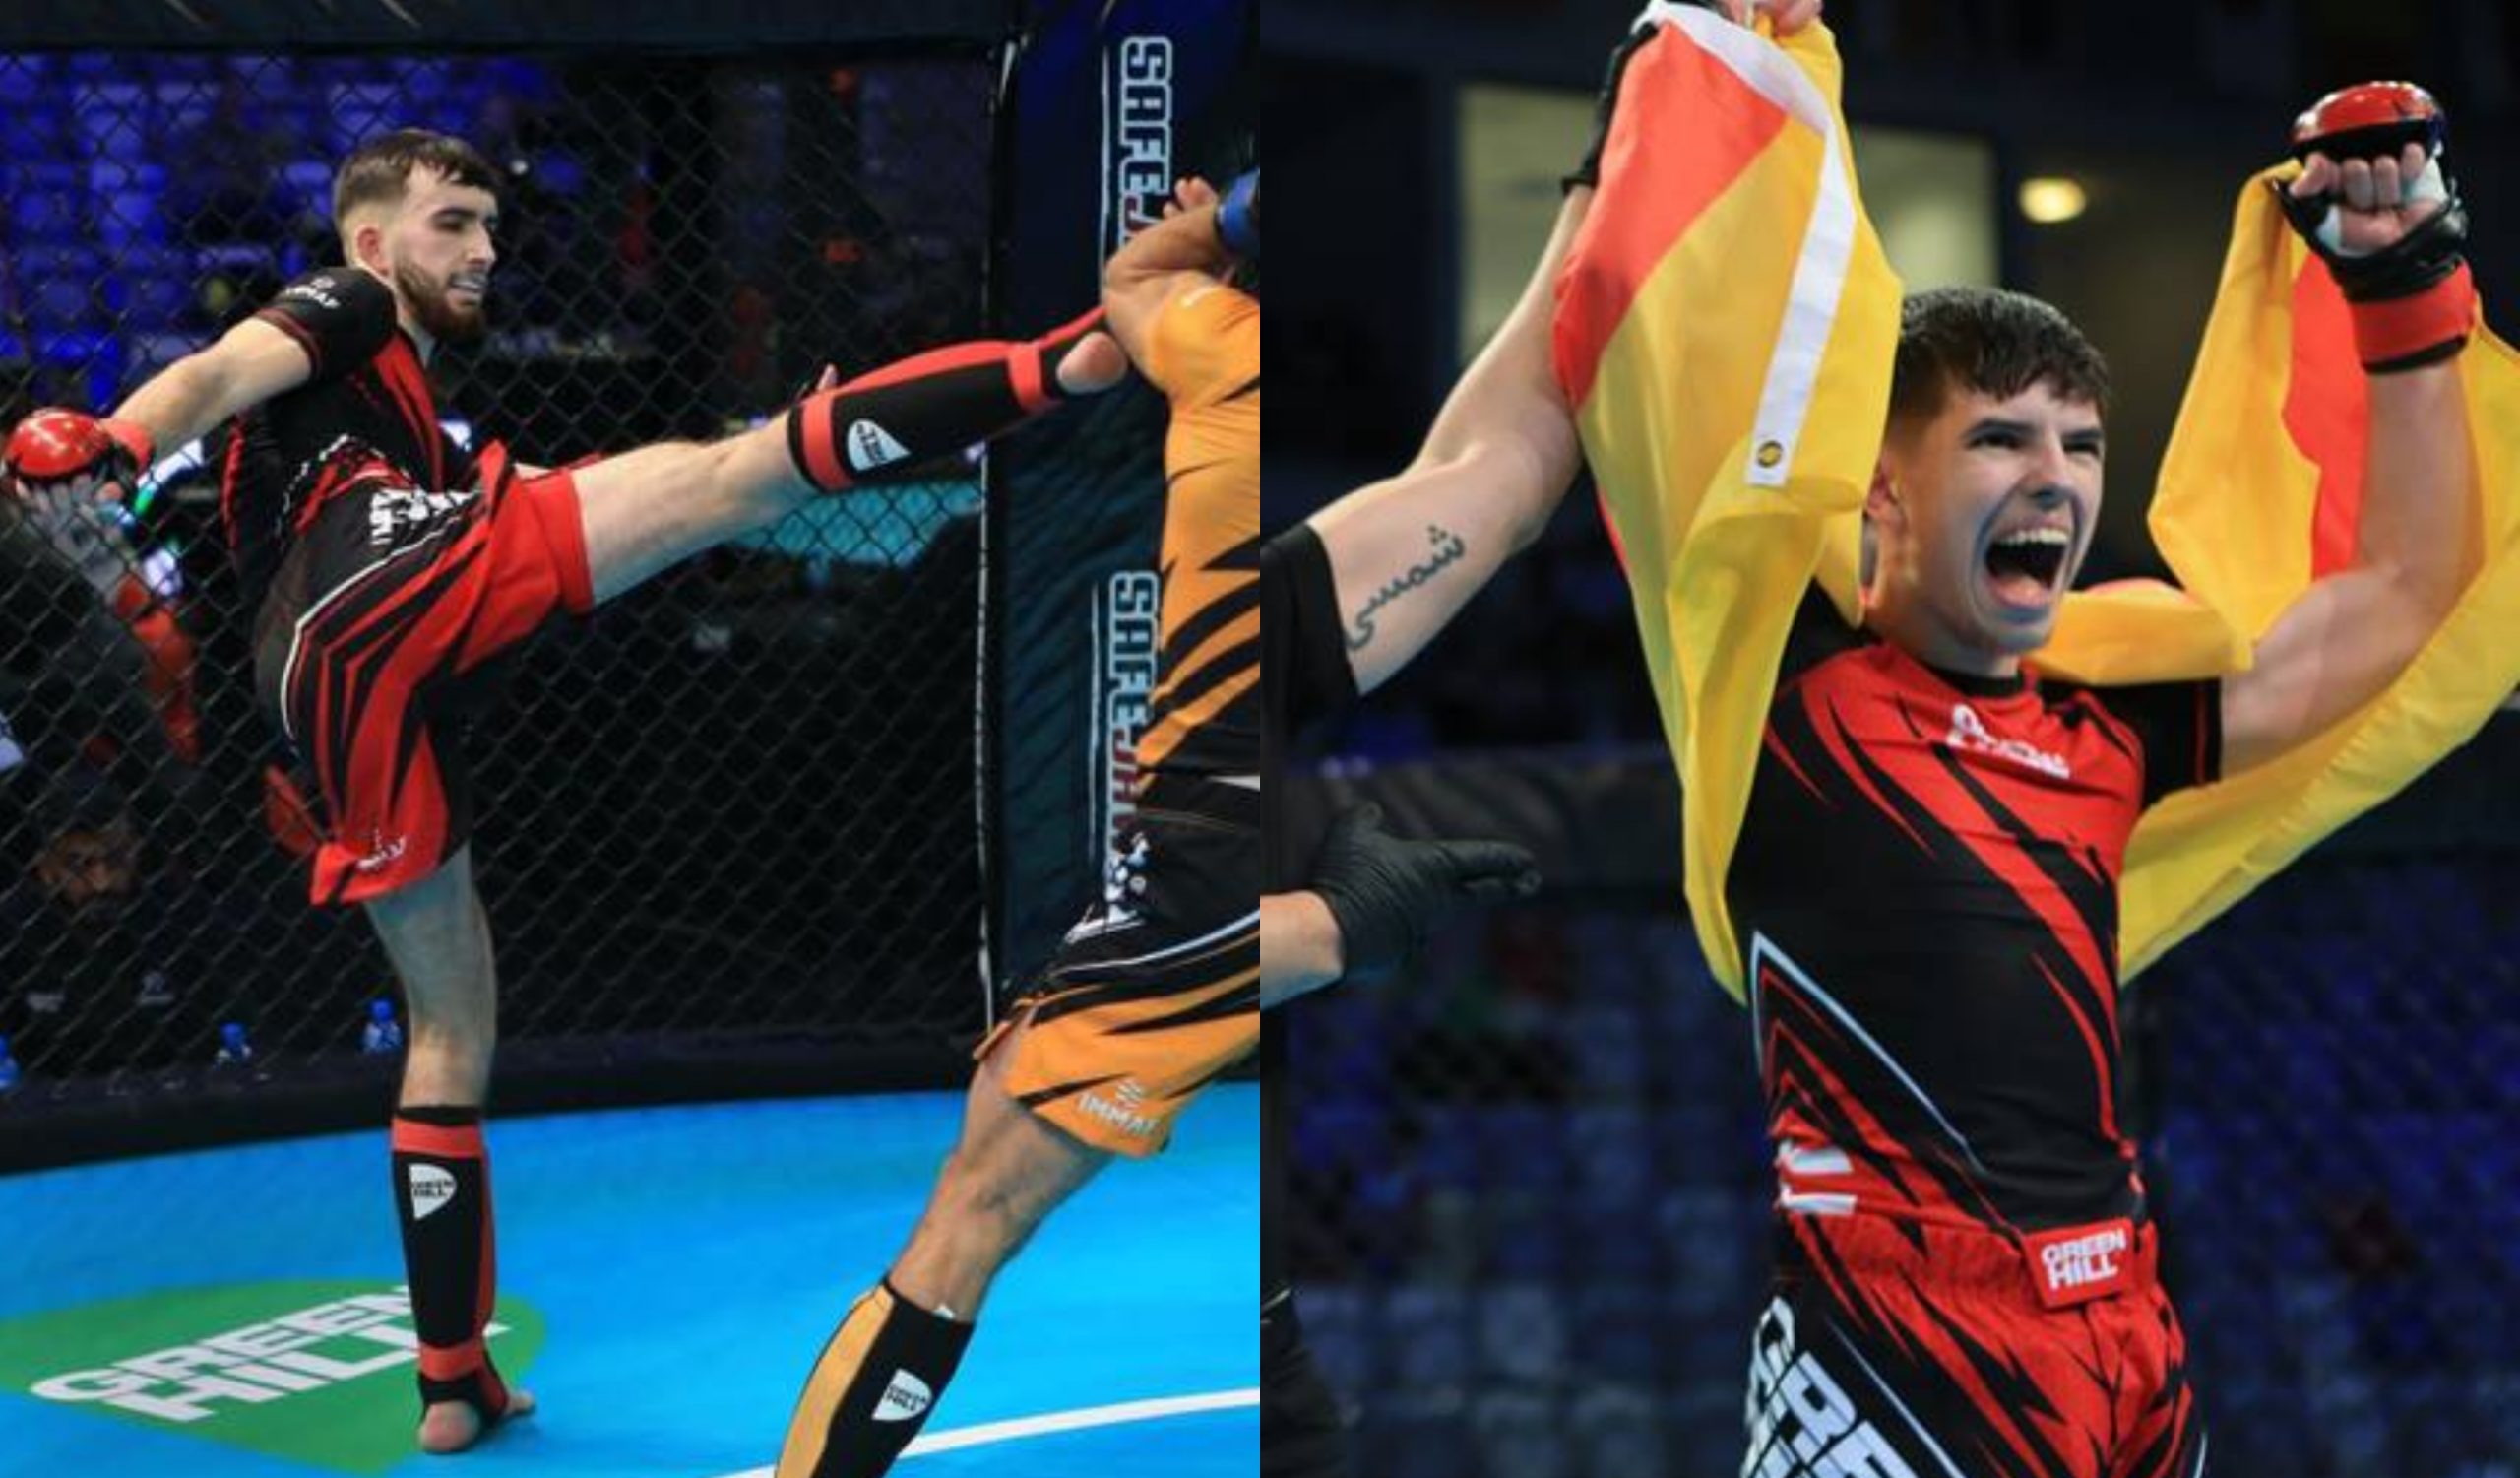 Ulster's Corr duo talk 2018 IMMAF Euros, preparing Northern Ireland for Junior division prominence